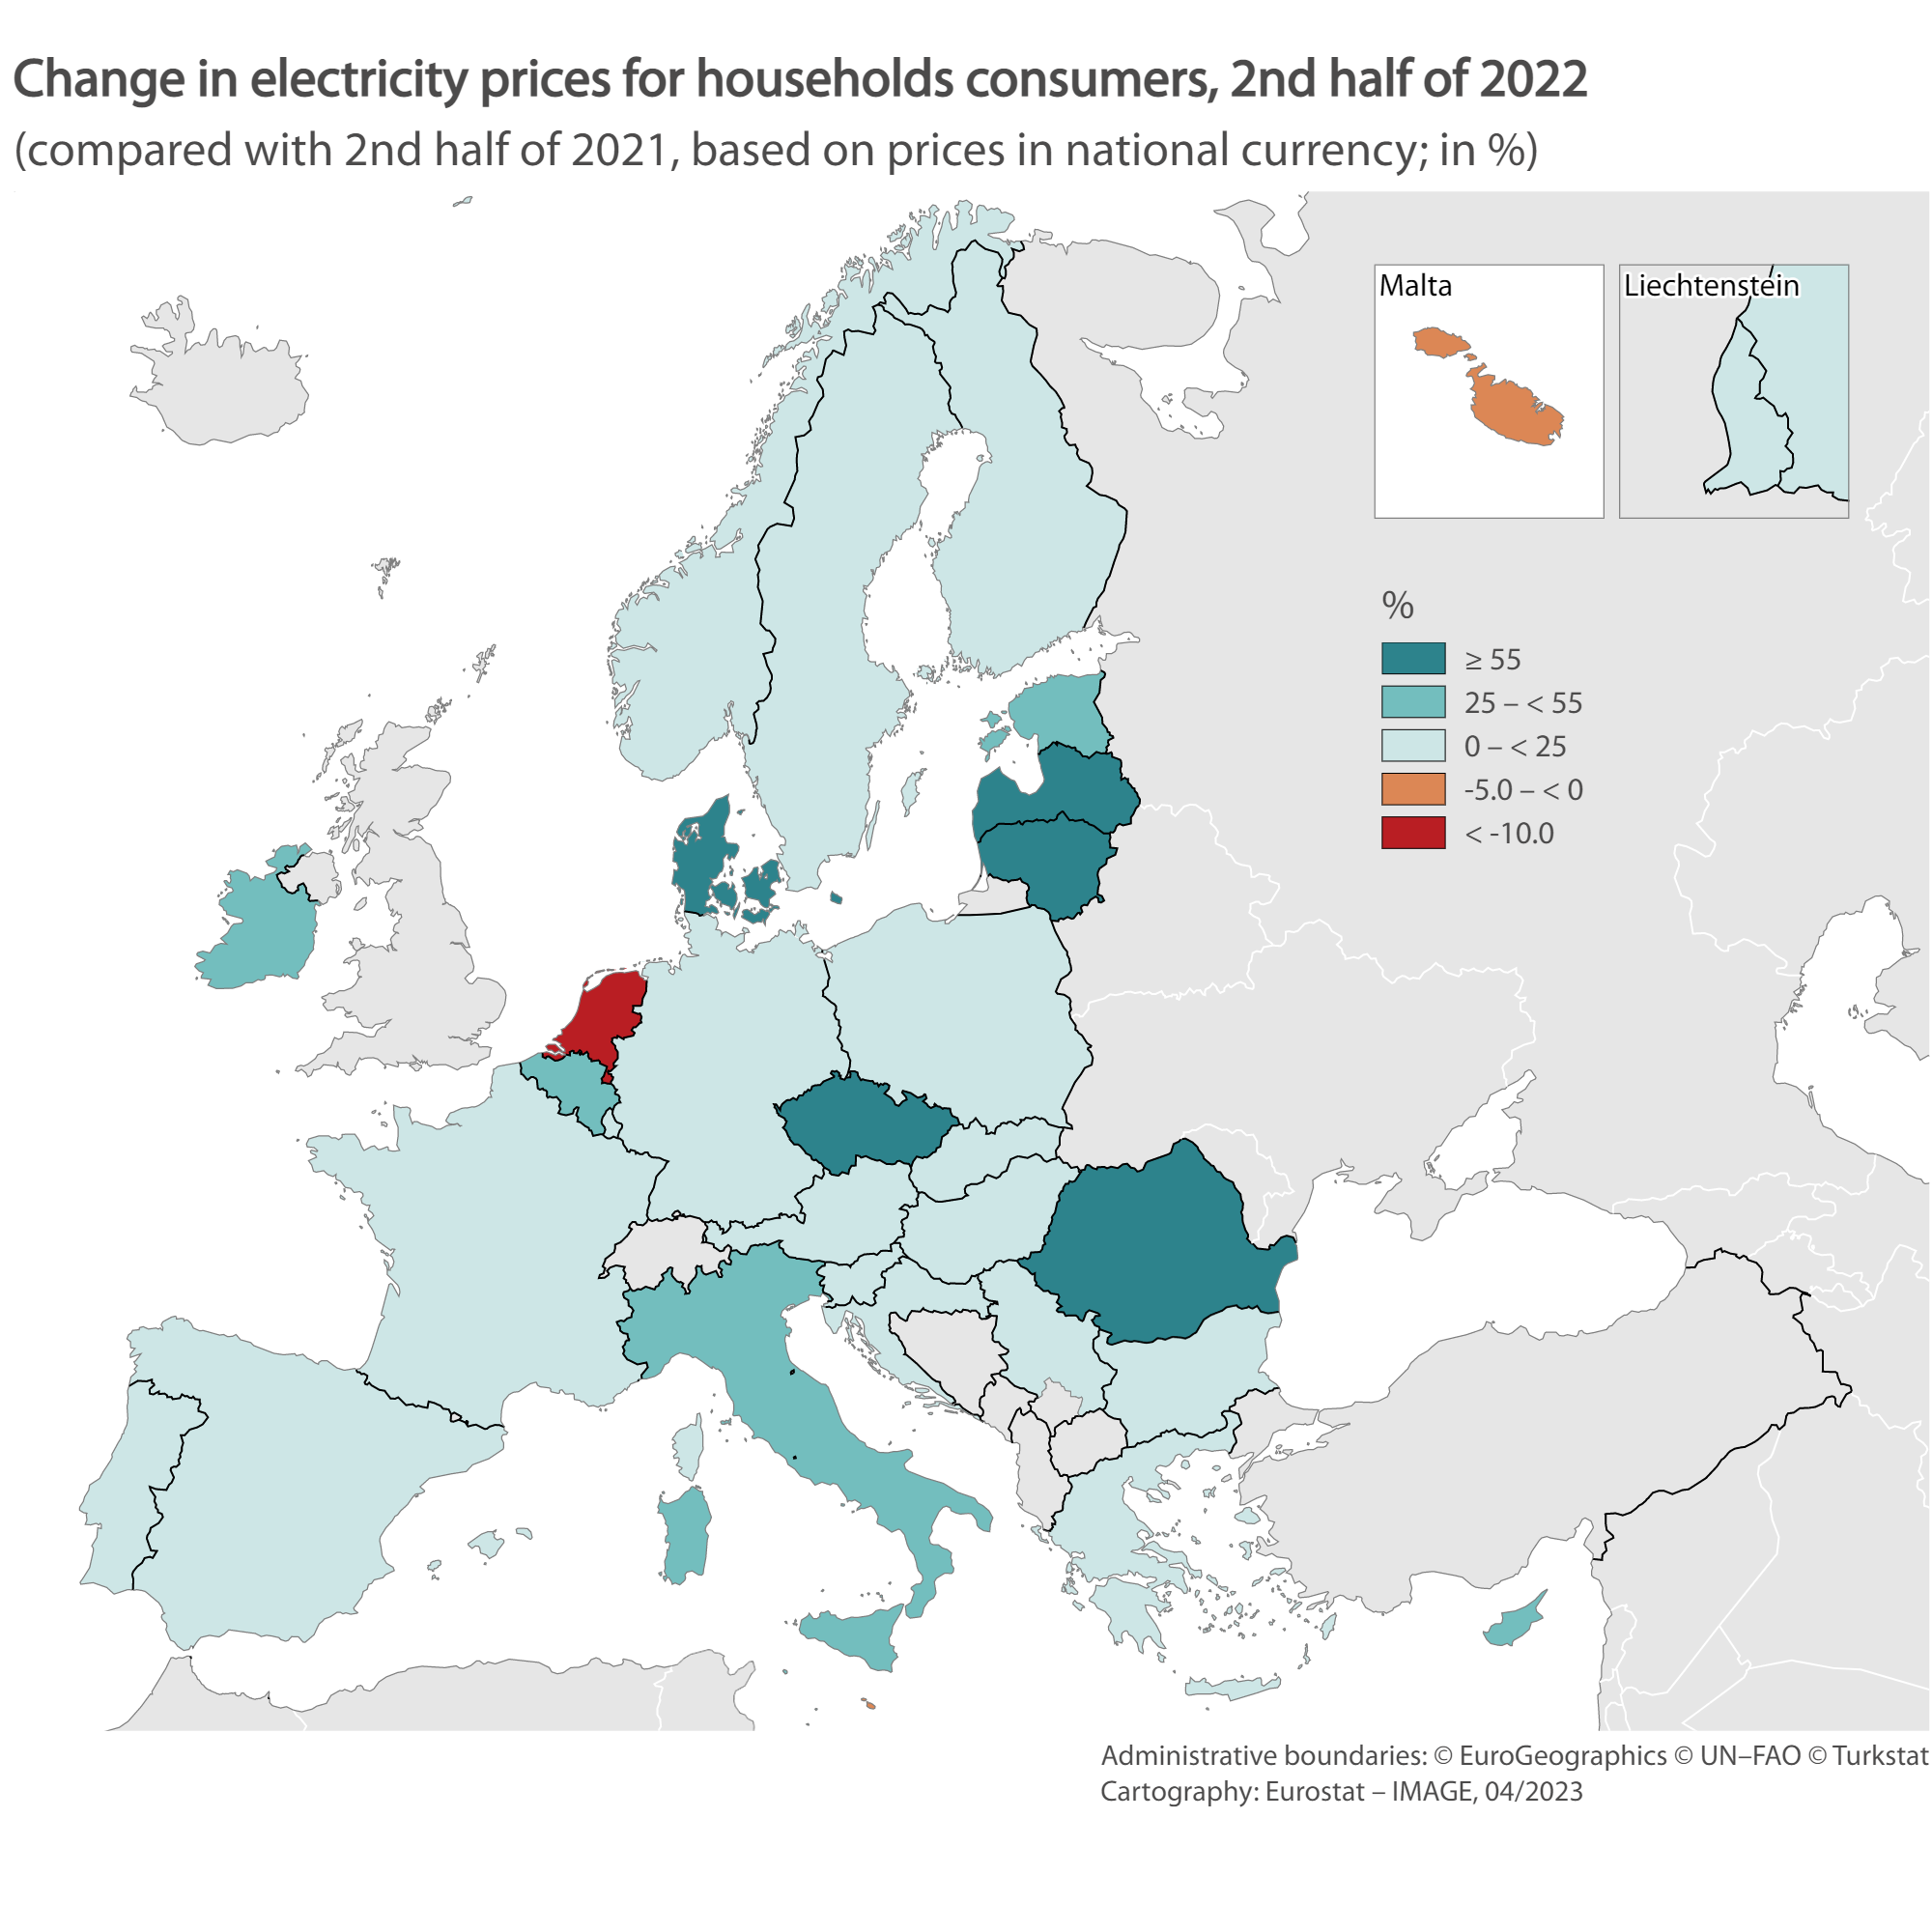 Map: change in electricity prices in the EU, 2nd half of 2022 compared with 2nd half of 2021, based in prices in national currencies, in %